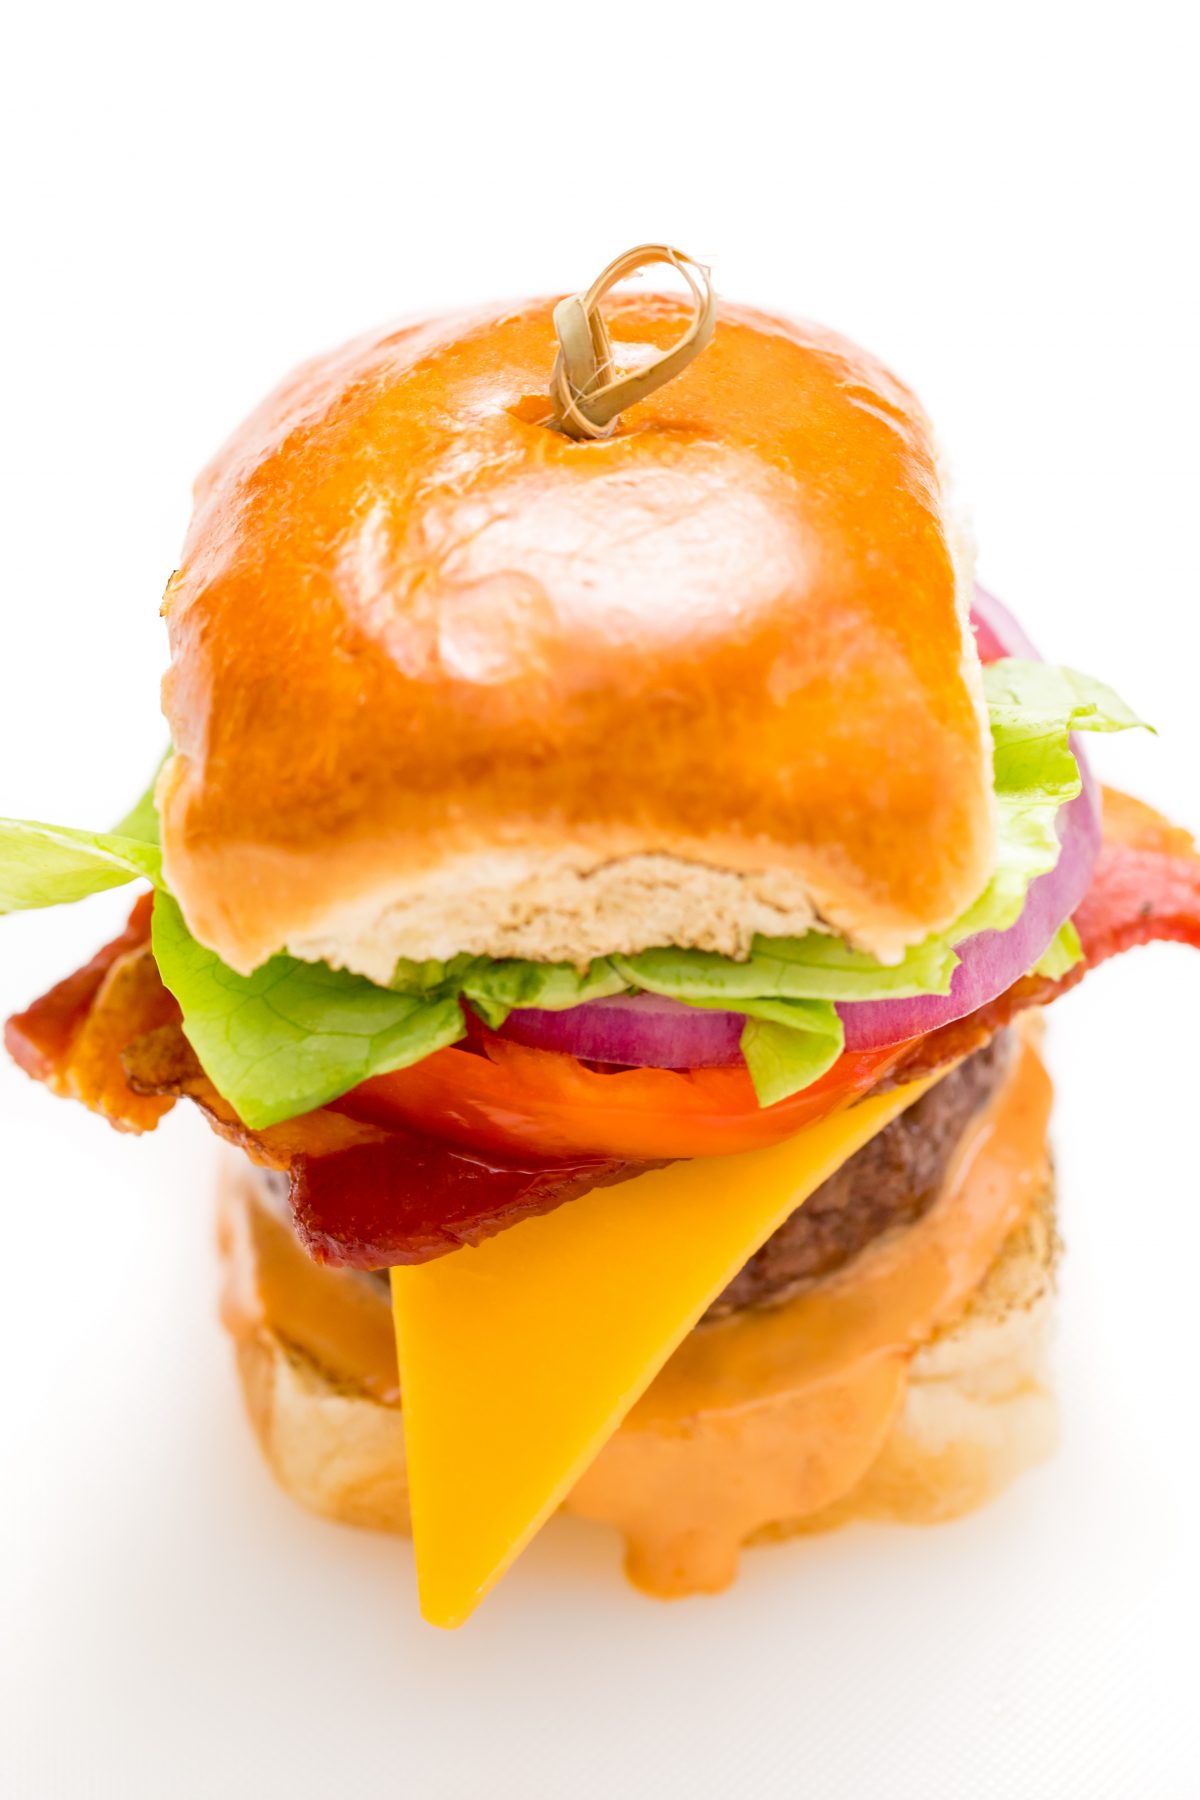 4th of July sliders: The best baby burgers